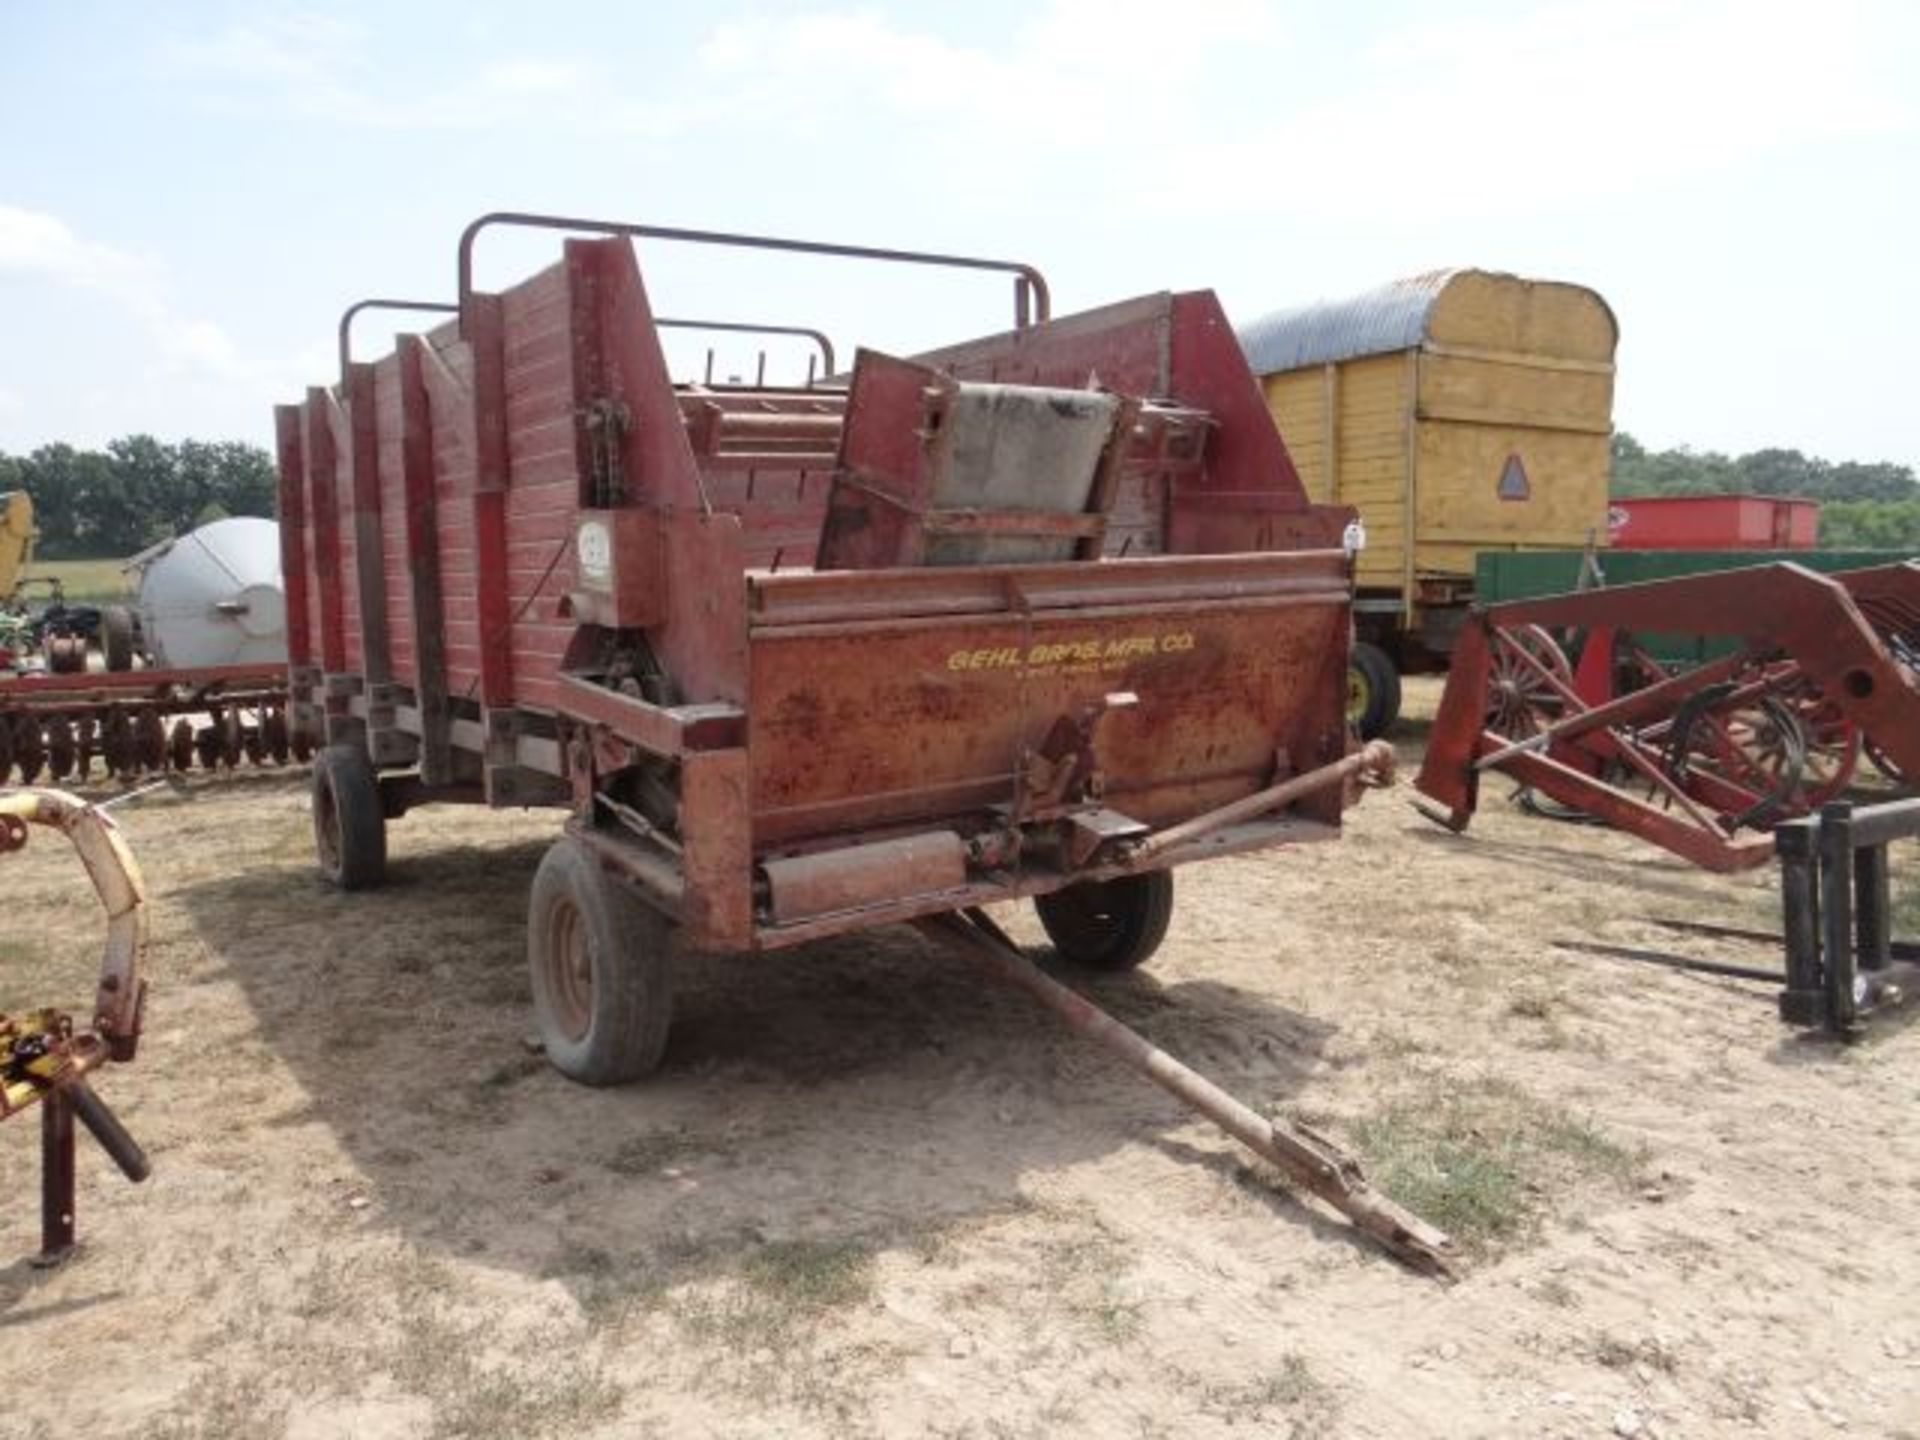 Gehl Silage Wagon 540 PTO, Manual in the Shed - Image 2 of 3